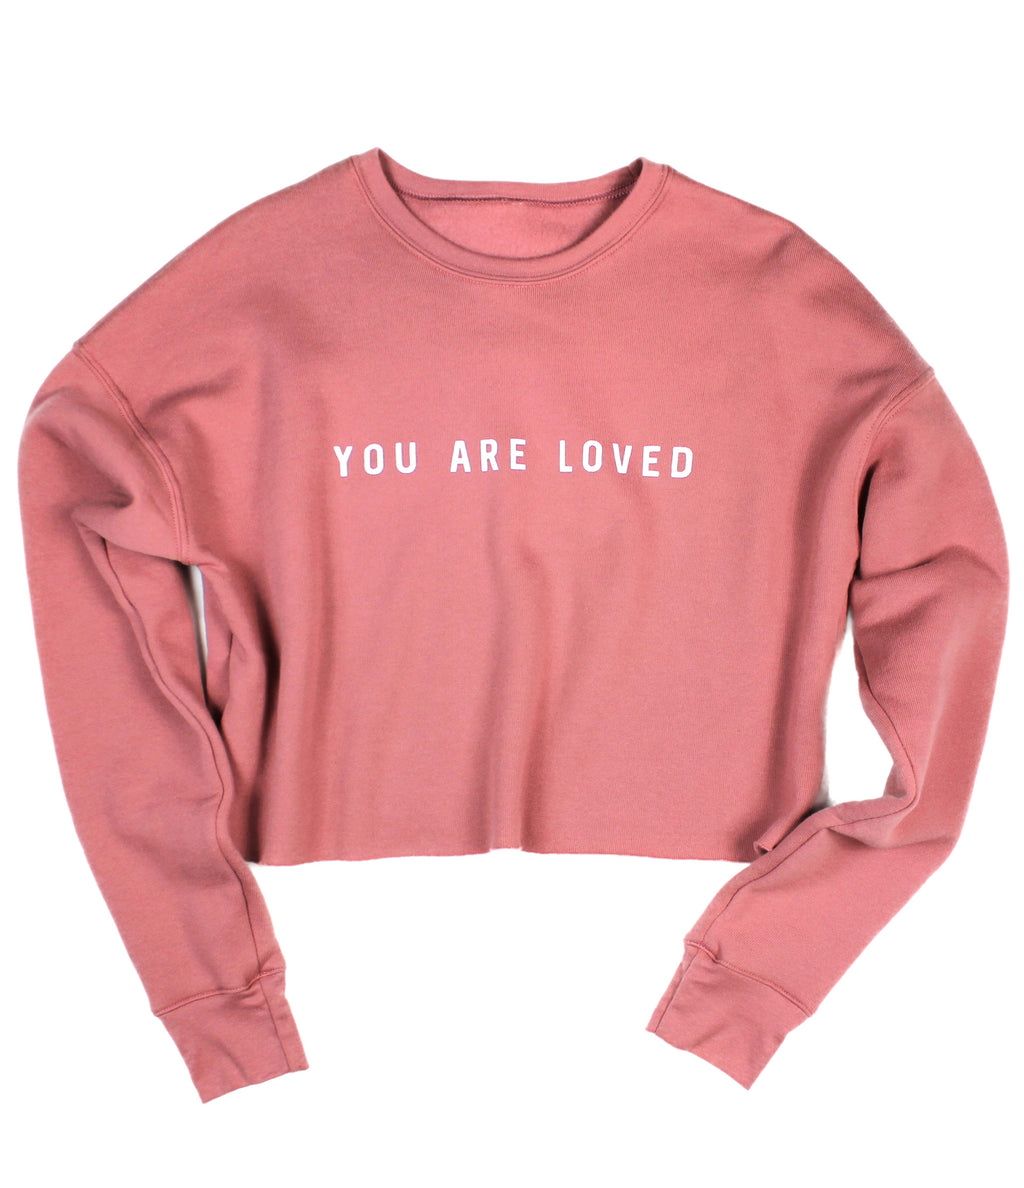 YOU ARE LOVED MAUVE WOMEN'S CROPPED CREW FLEECE